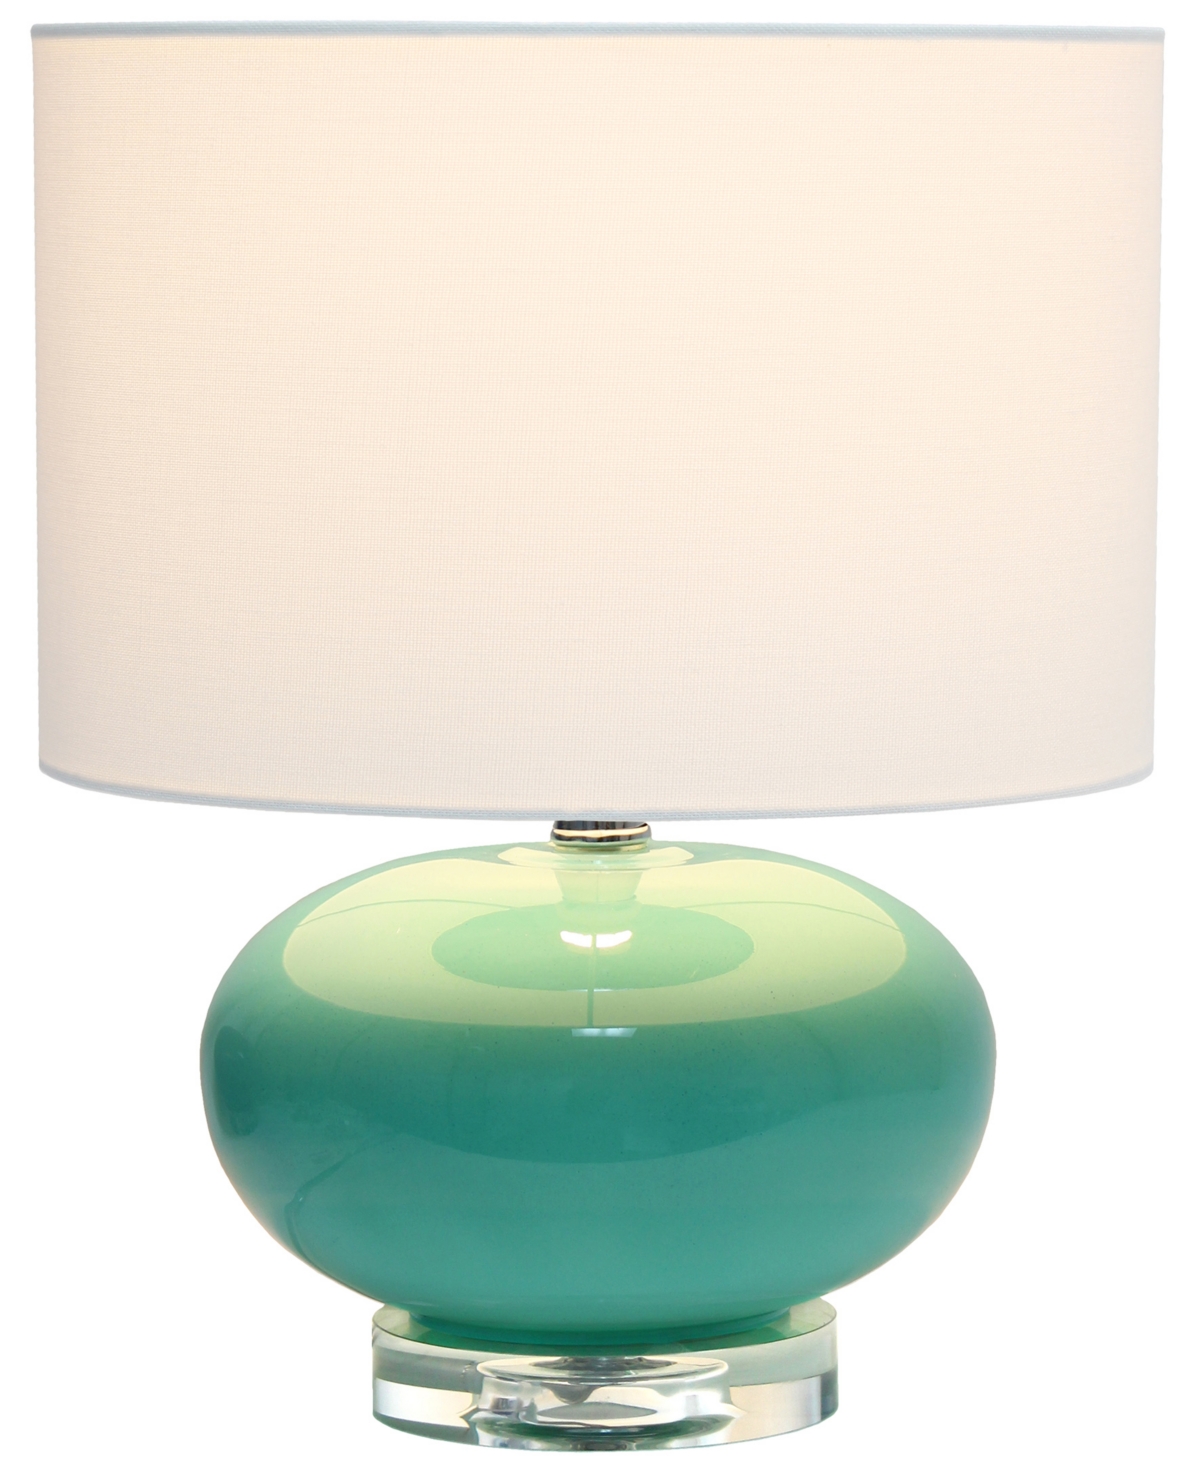 All The Rages 15.25" Modern Overload Glass Bedside Table Lamp With White Fabric Shade In Aqua